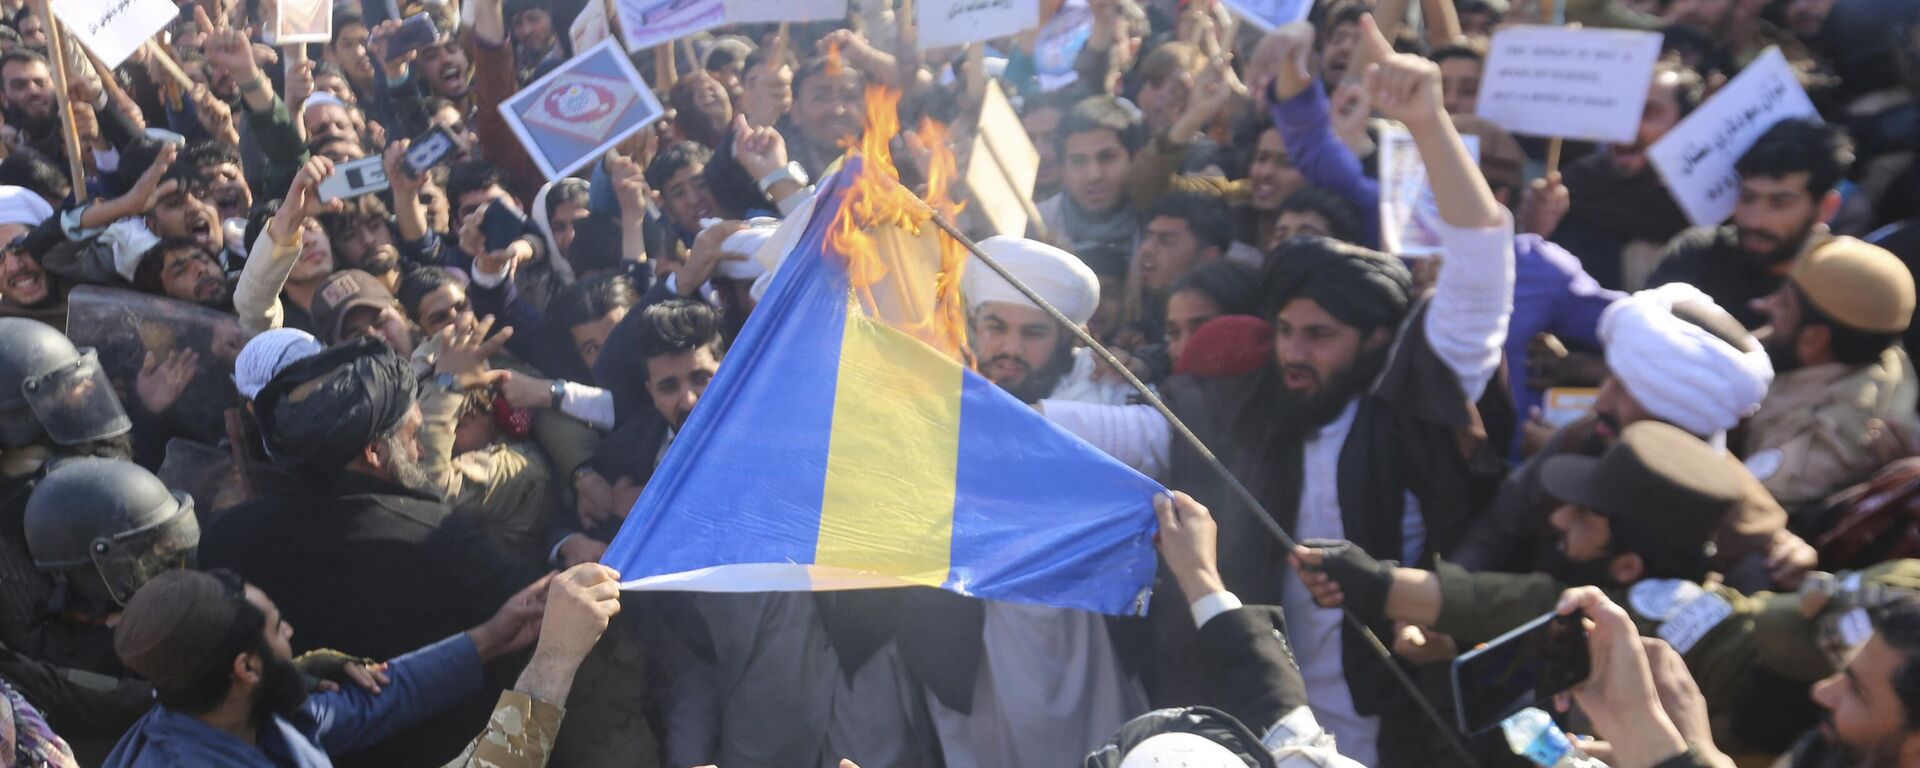 Afghans shout slogans as they burn a flag of Sweden during a protest against the burning of the Koran by Swedish-Danish far-right politician Rasmus Paludan, after Friday prayers in Jalalabad on January 27, 2023. - Sputnik International, 1920, 27.01.2023